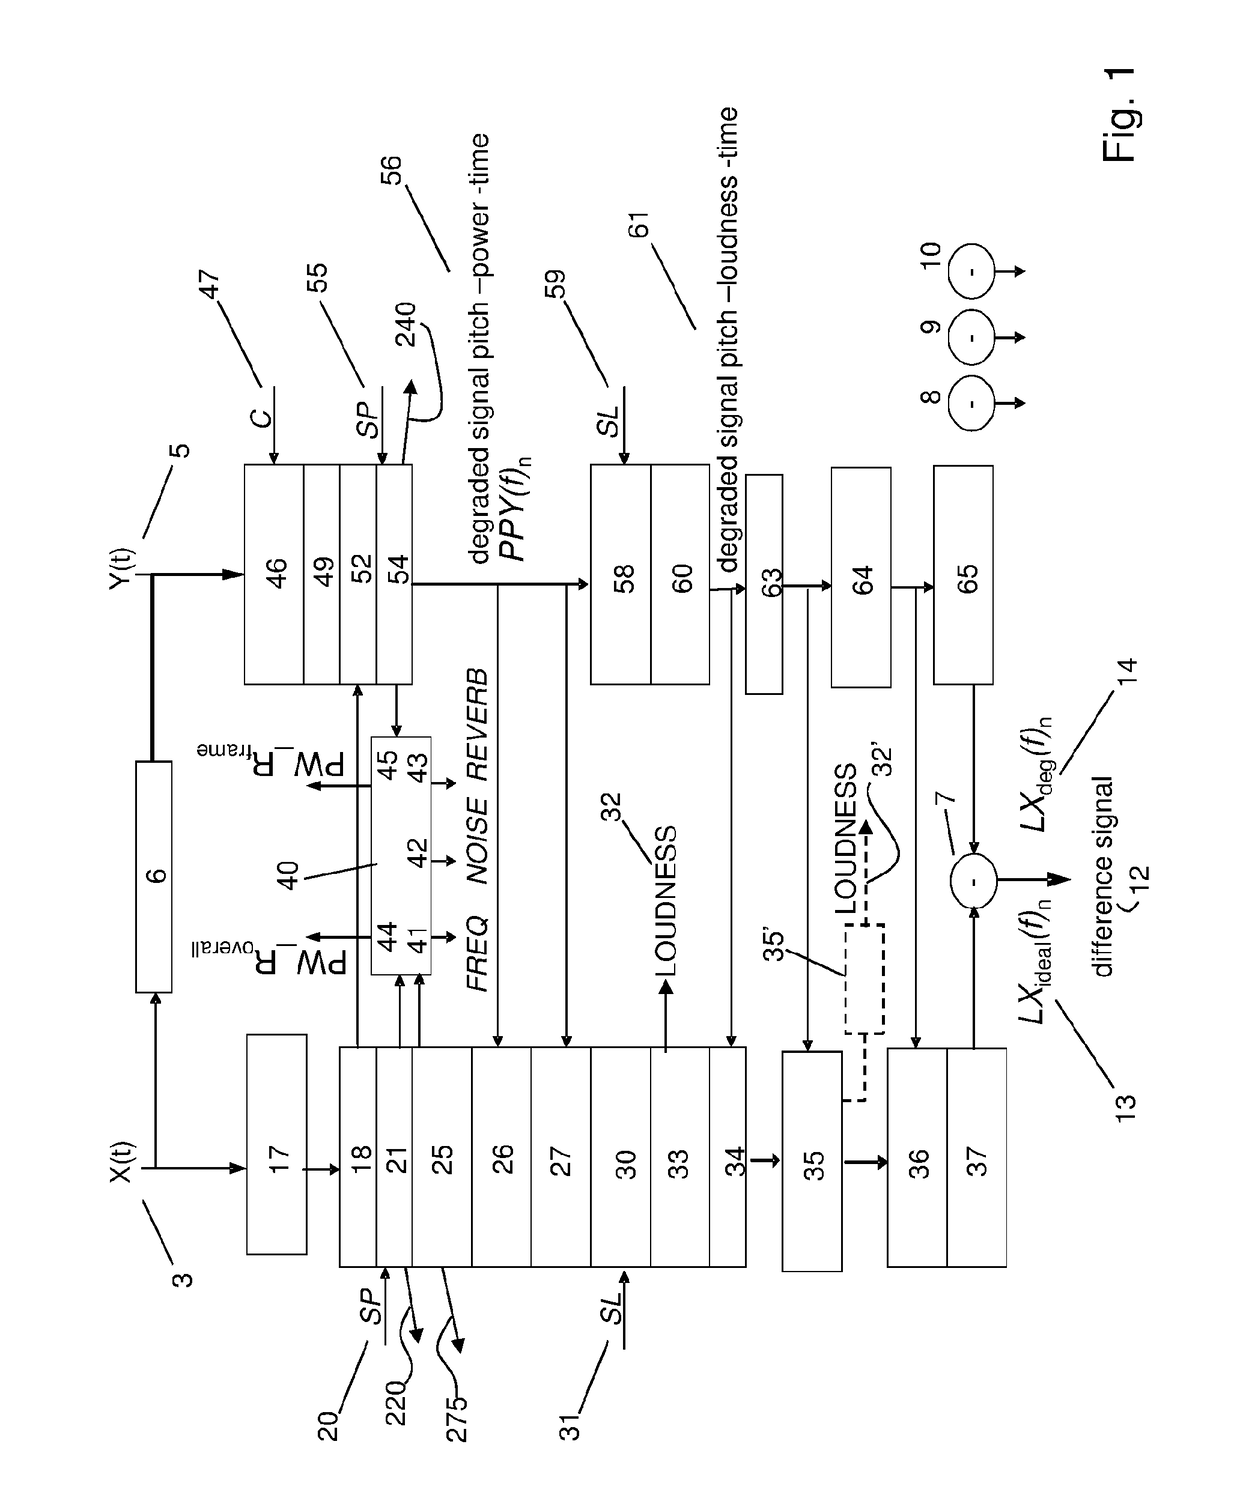 Method of and Apparatus for Evaluating Quality of a Degraded Speech Signal